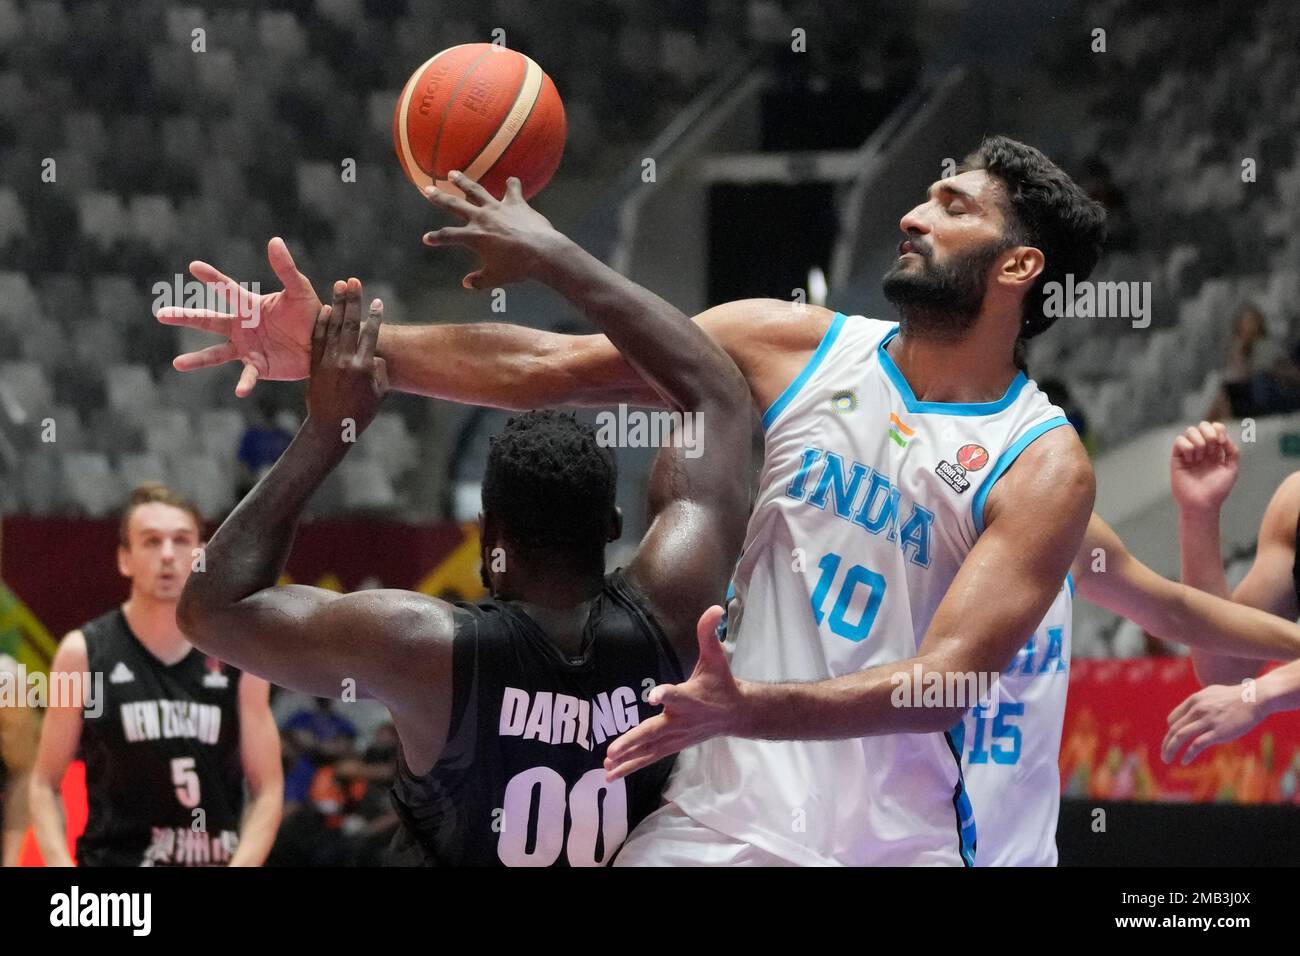 India's Amritpal Singh, right, battles for a rebound against New Zealand's  Max Darling during their group phase match at FIBA Asia Cup basketball  tournament in Jakarta, Indonesia, Wednesday, July 13, 2022. (AP